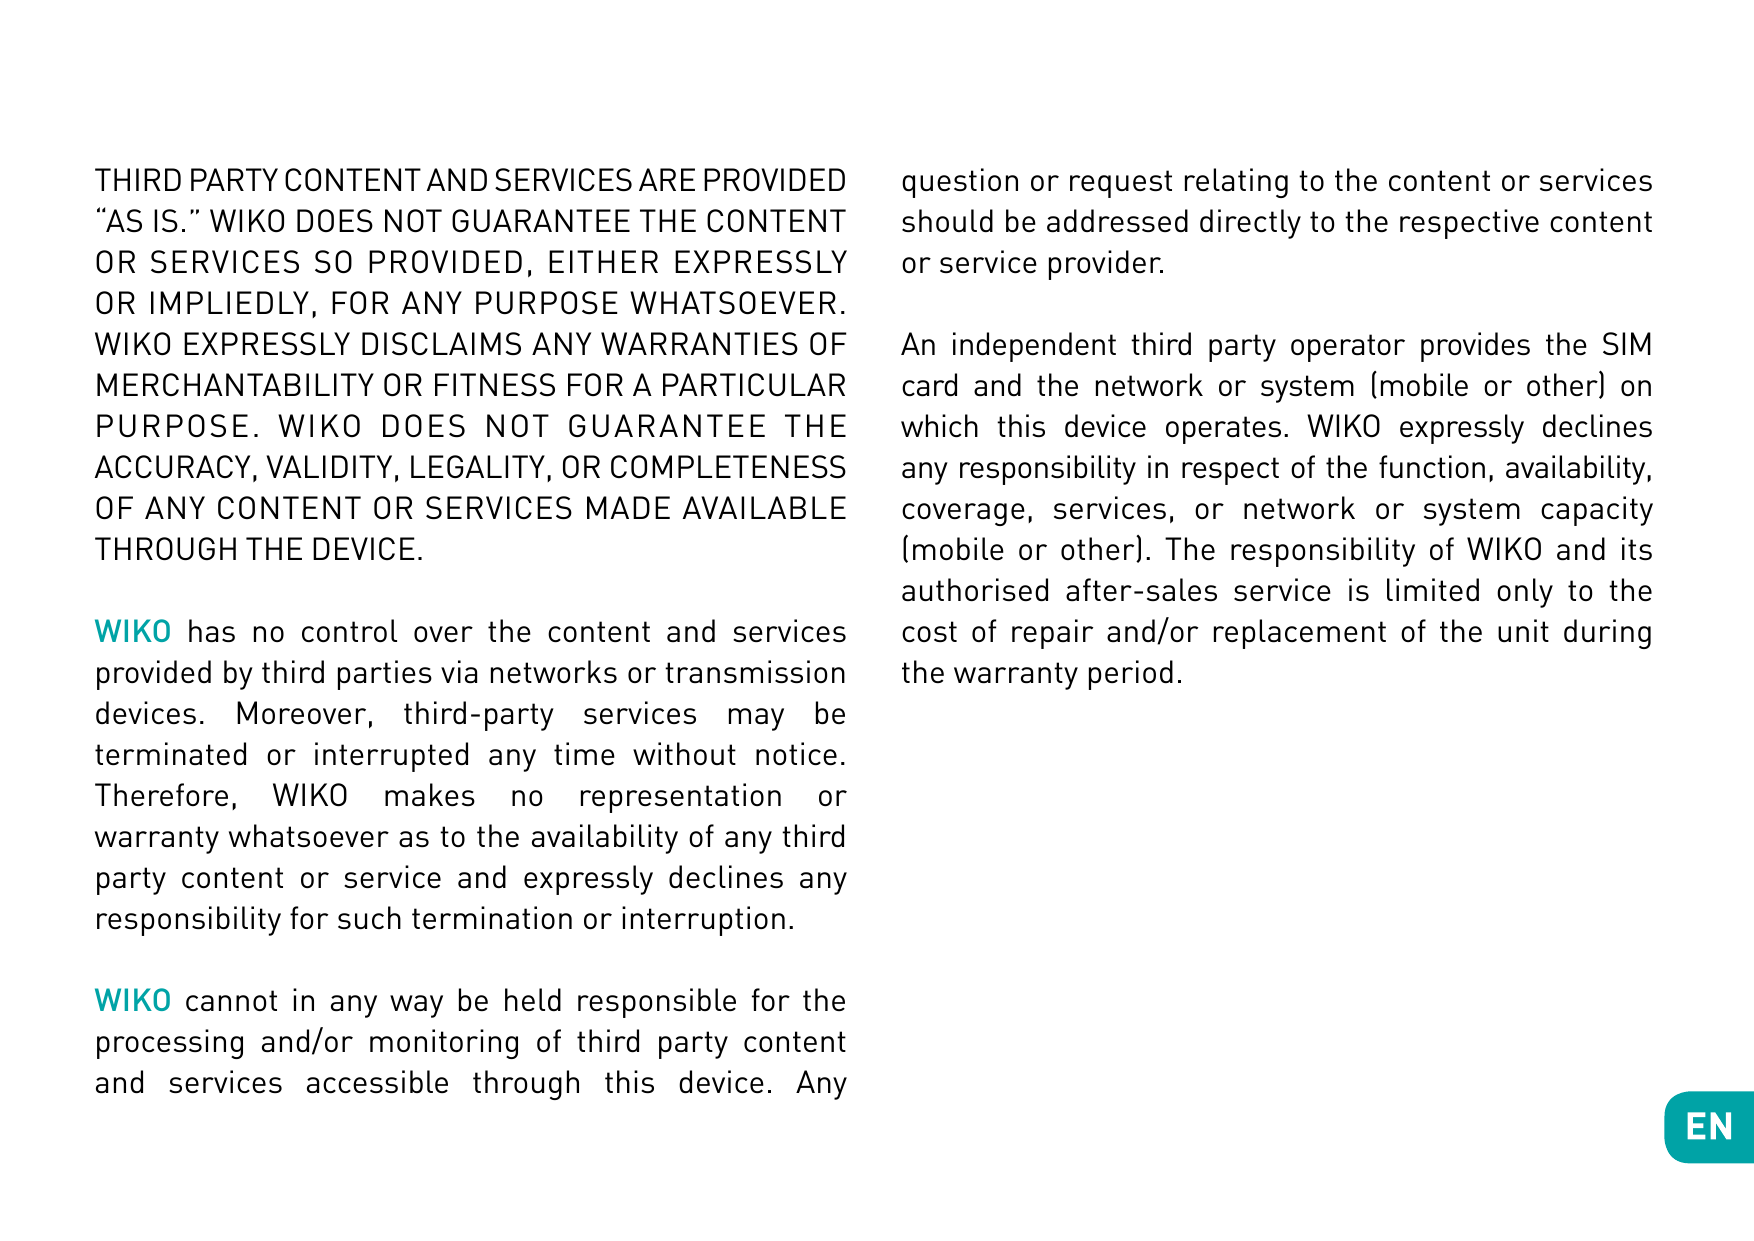 THIRD PARTY CONTENT AND SERVICES ARE PROVIDED“AS IS.” WIKO DOES NOT GUARANTEE THE CONTENTOR SERVICES SO PROVIDED, EITHER EXPRESS